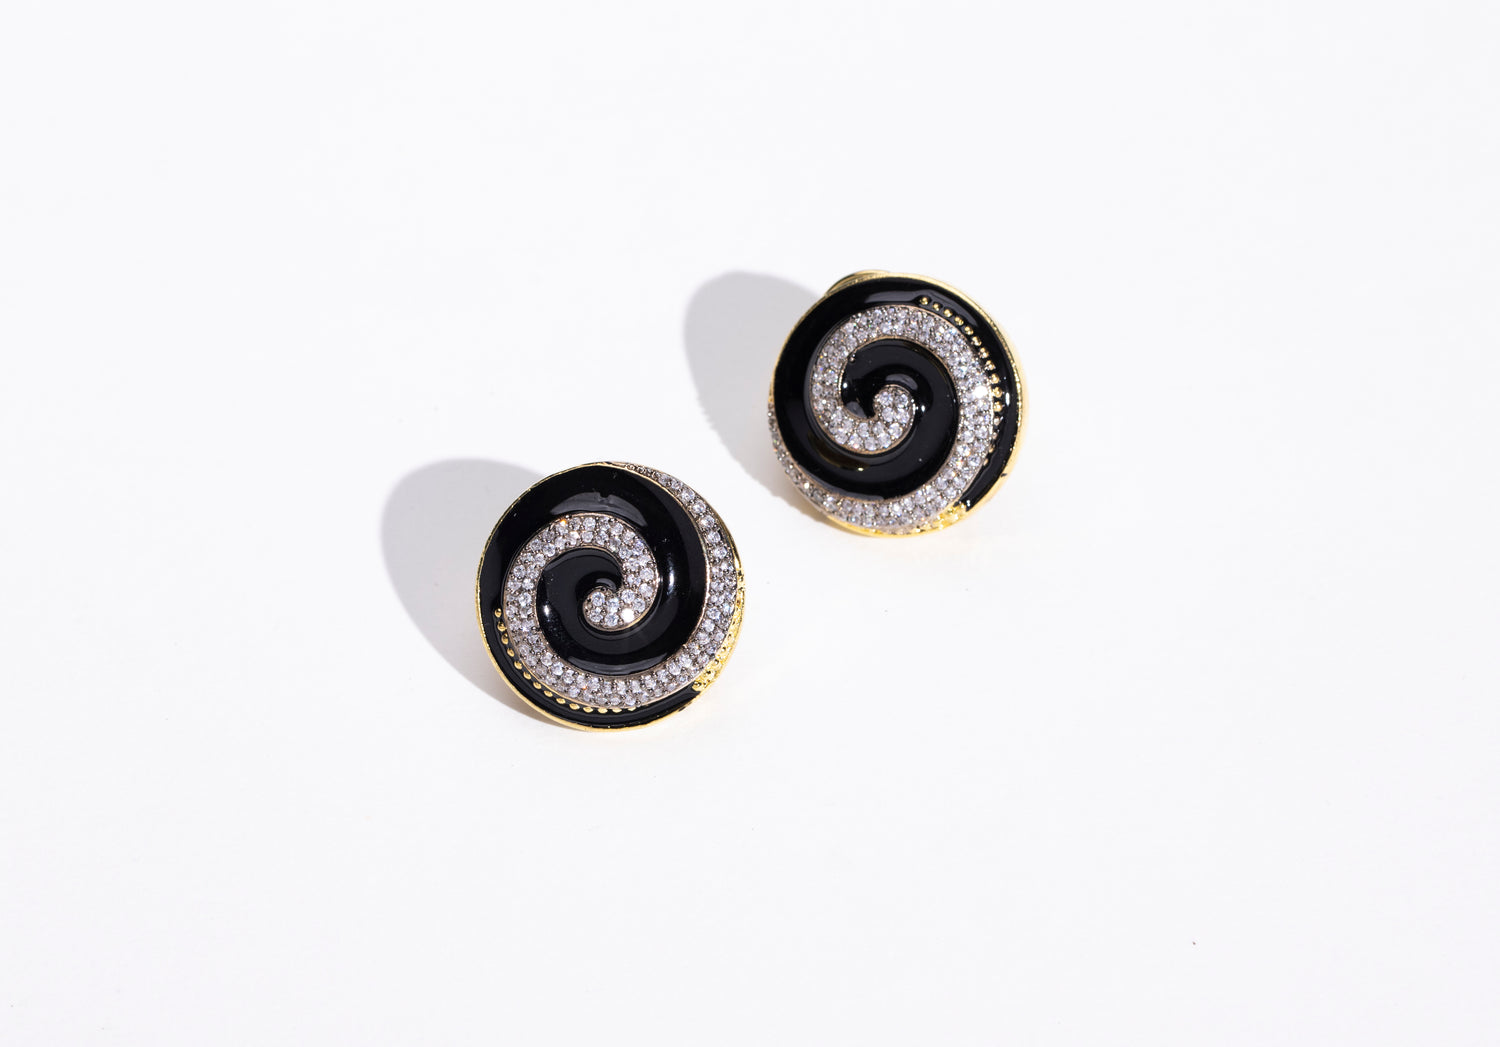 Statement Piece: Bold Black Spiral Circle Earrings for Women: Add elegance to any outfit with these classic earrings